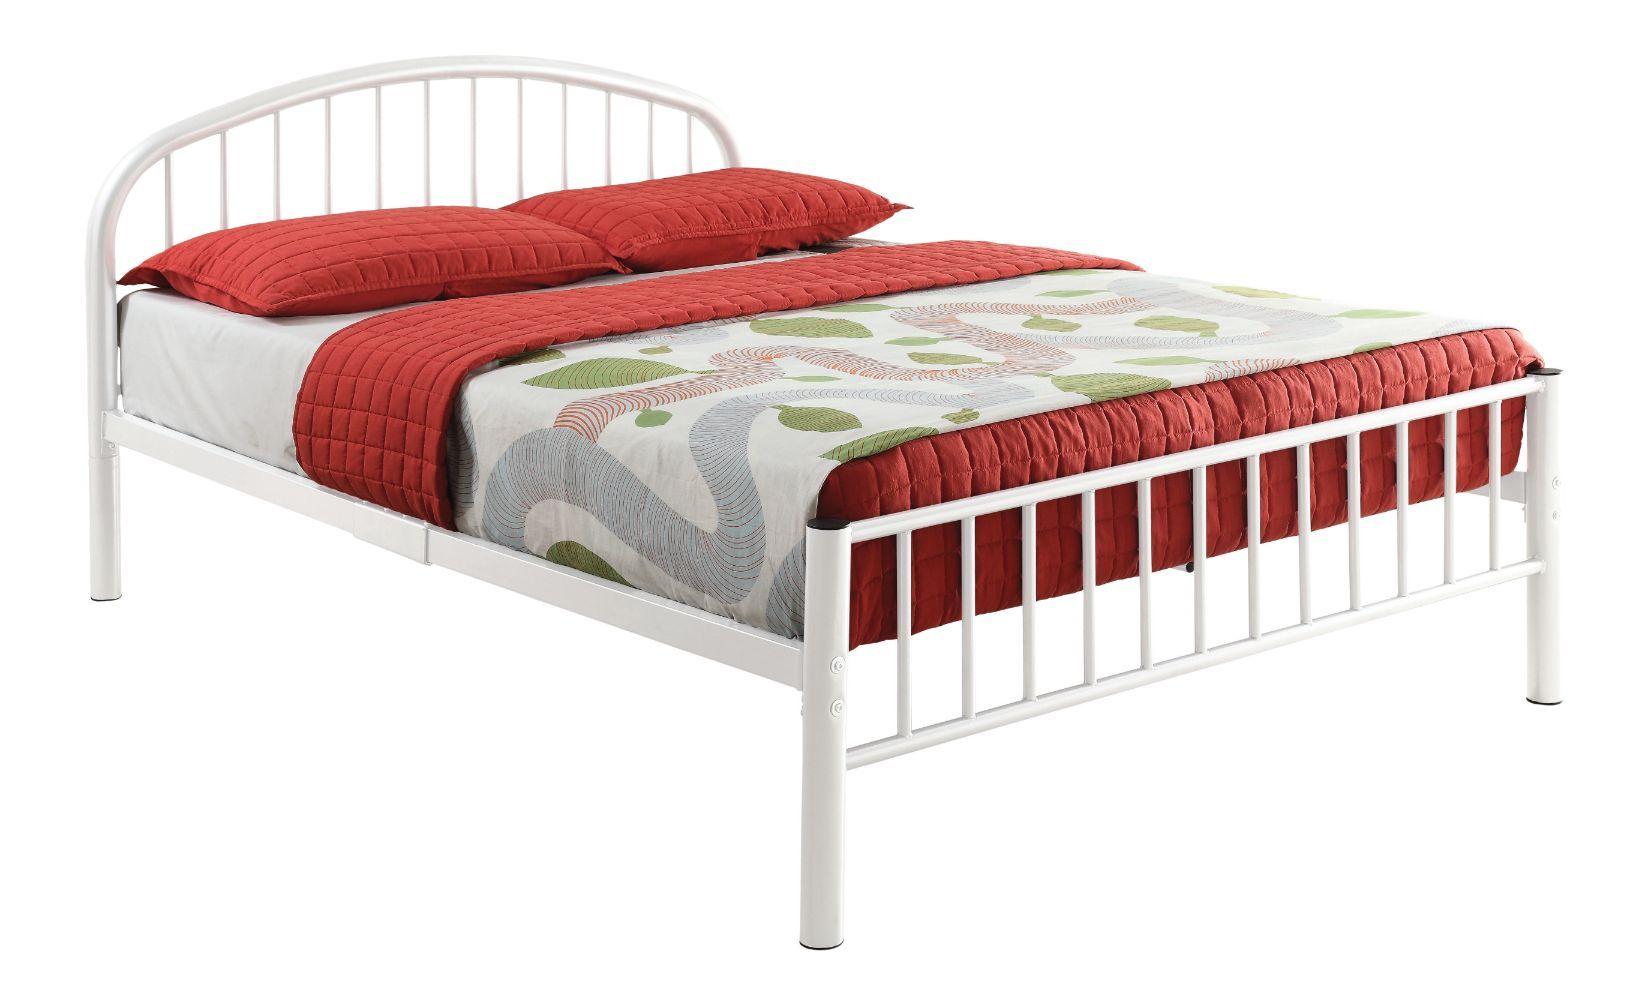 Acme Furniture Cailyn Kids Bed